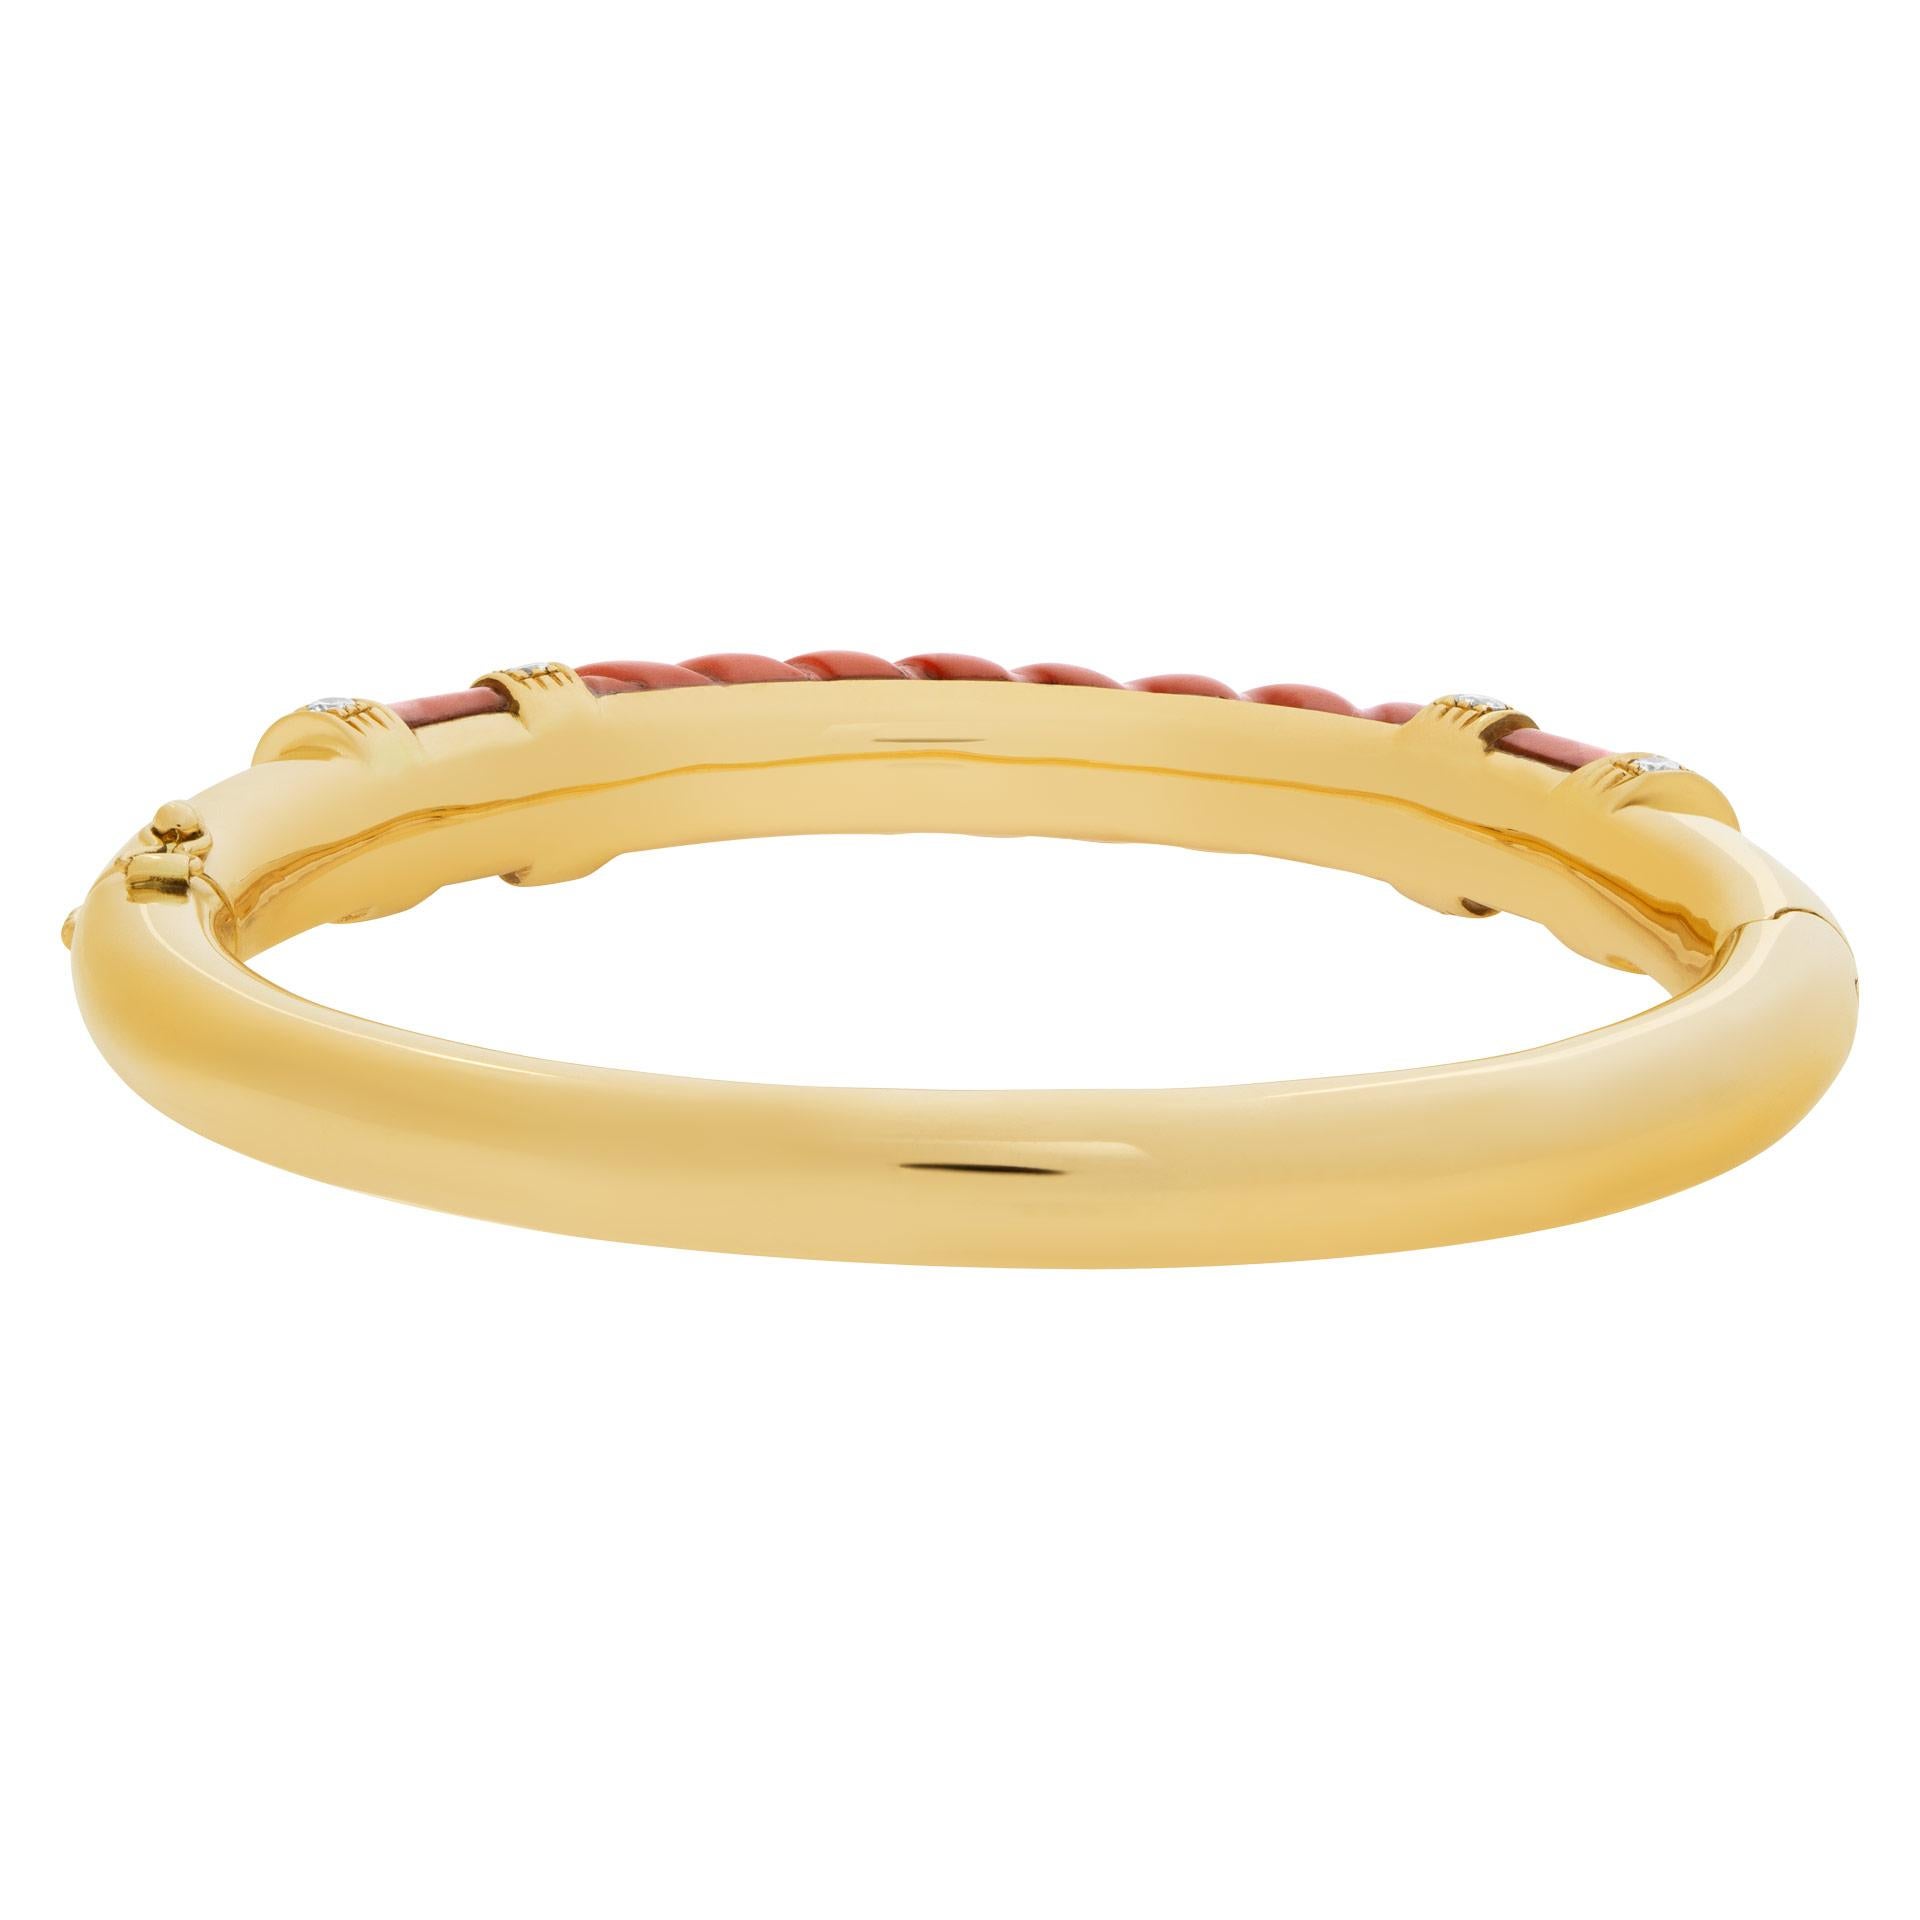 Retro Bangle with Coral and Diamond Accents